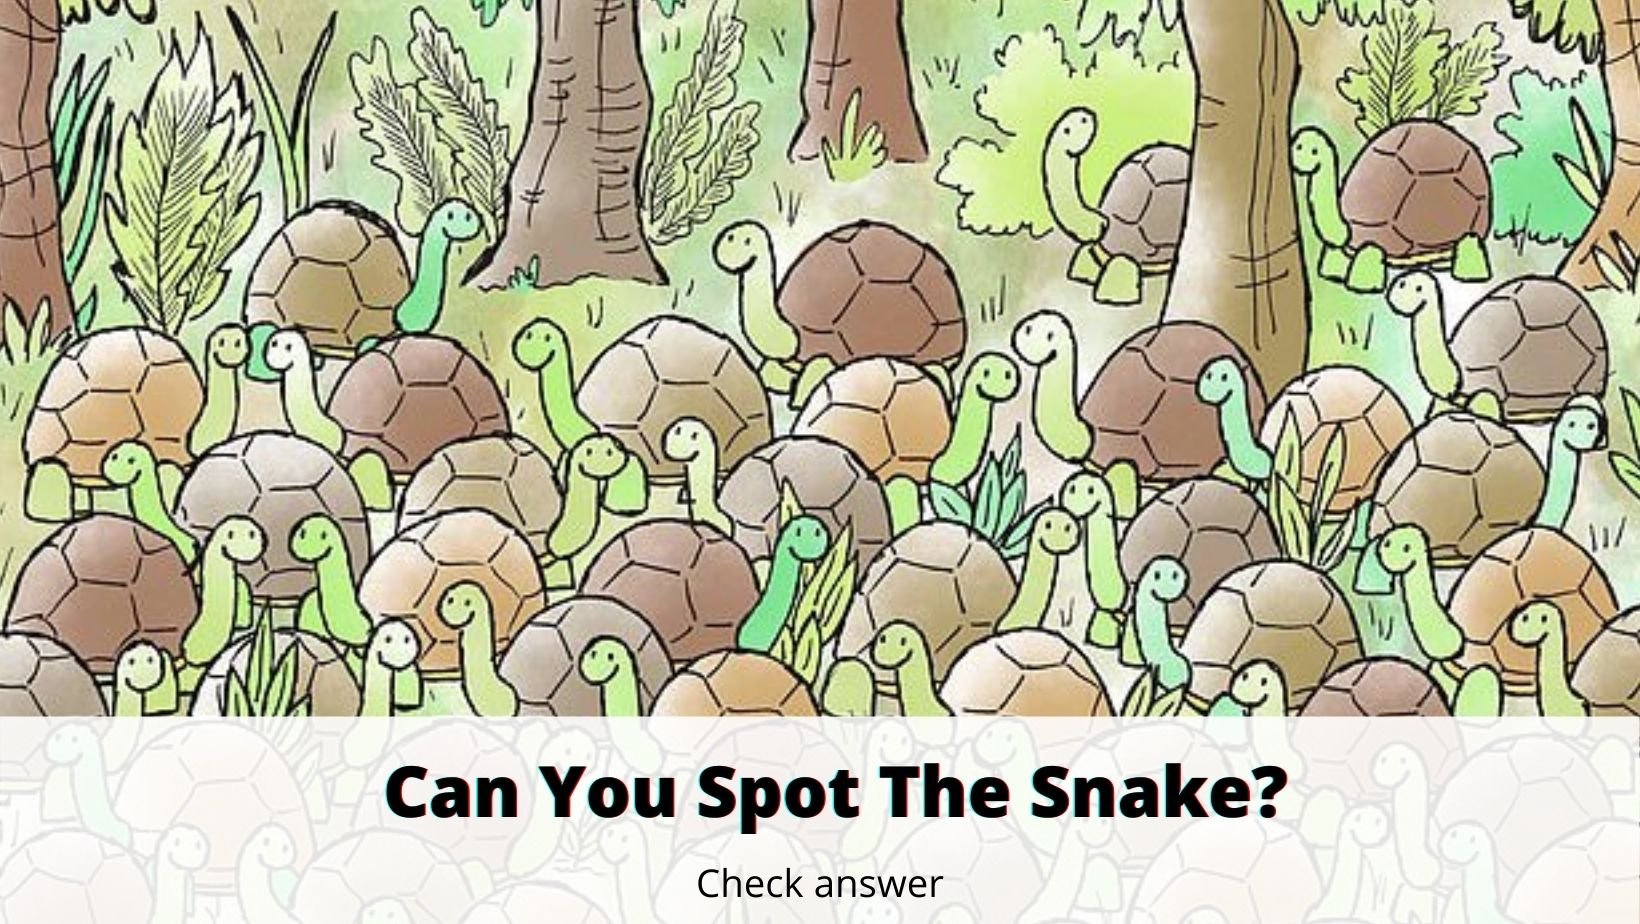 small joys thumbnail 6 2.jpg?resize=412,275 - Can You Find The Snake Among The Turtles?